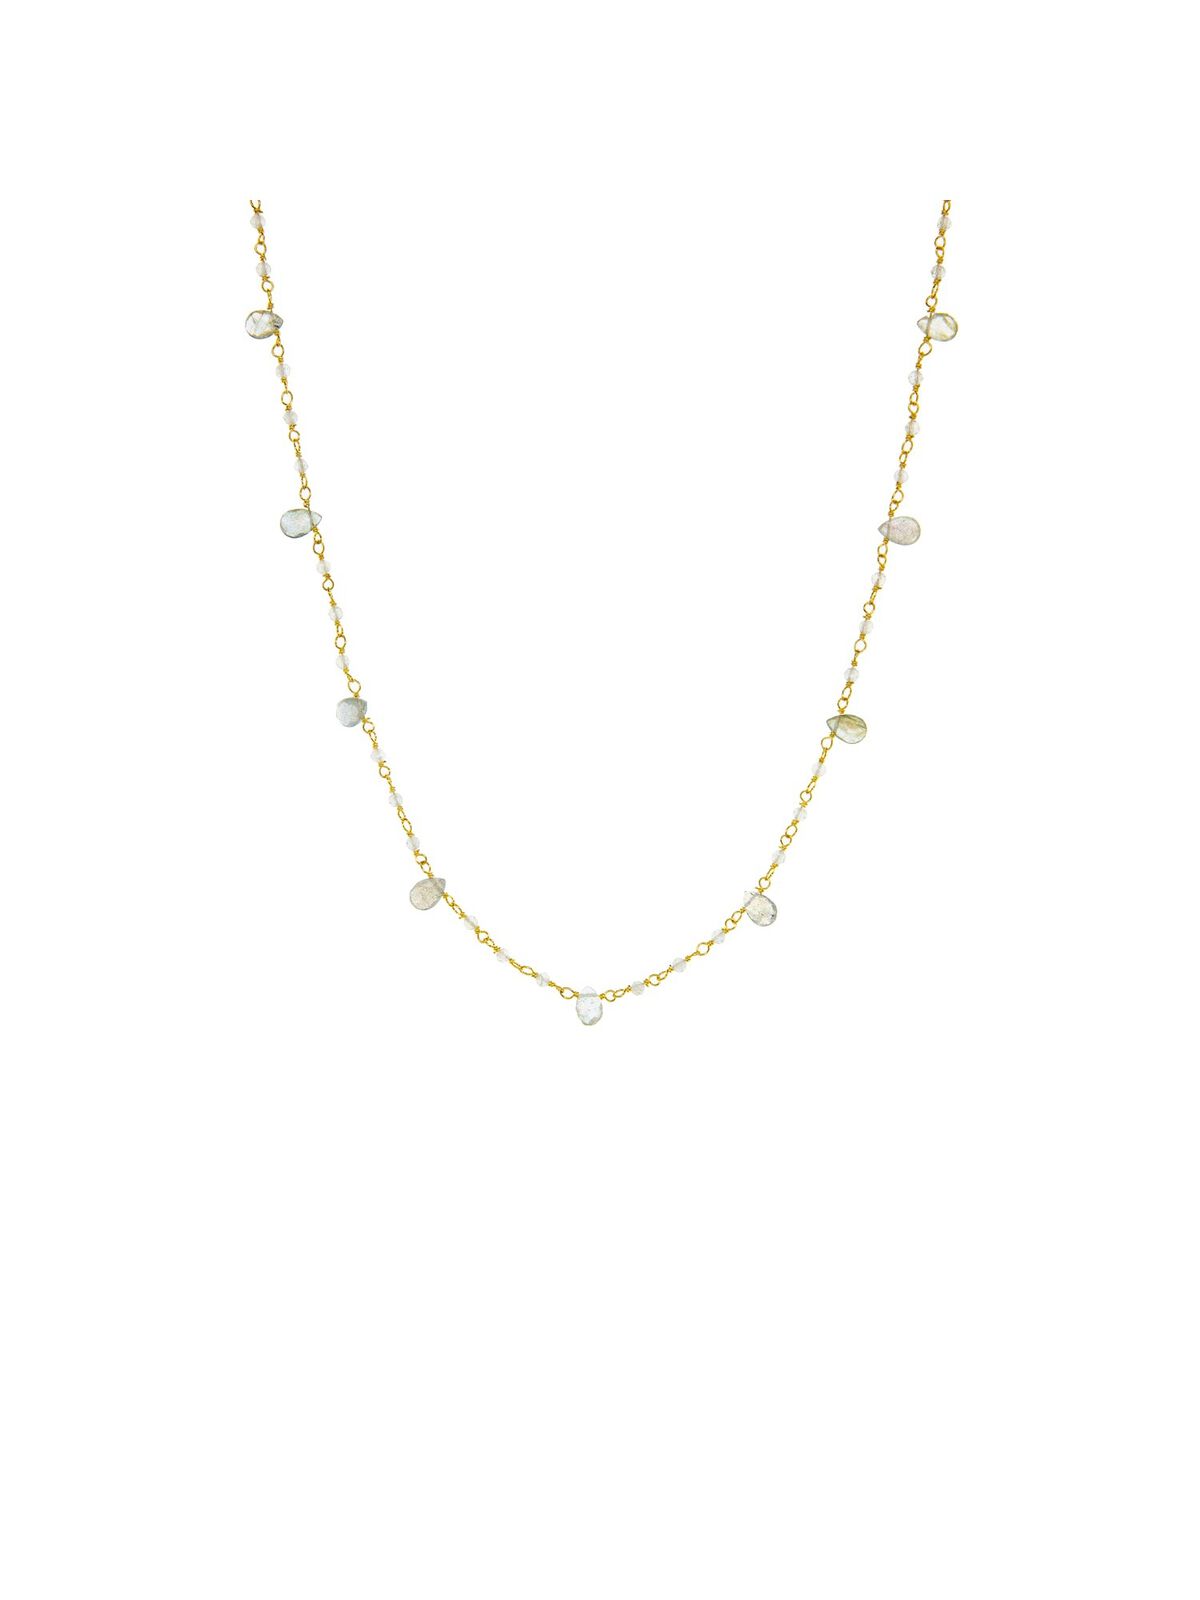 MARLYN SCHIFF GOLD PLATED NATURAL STONE BEADED NECKLACE